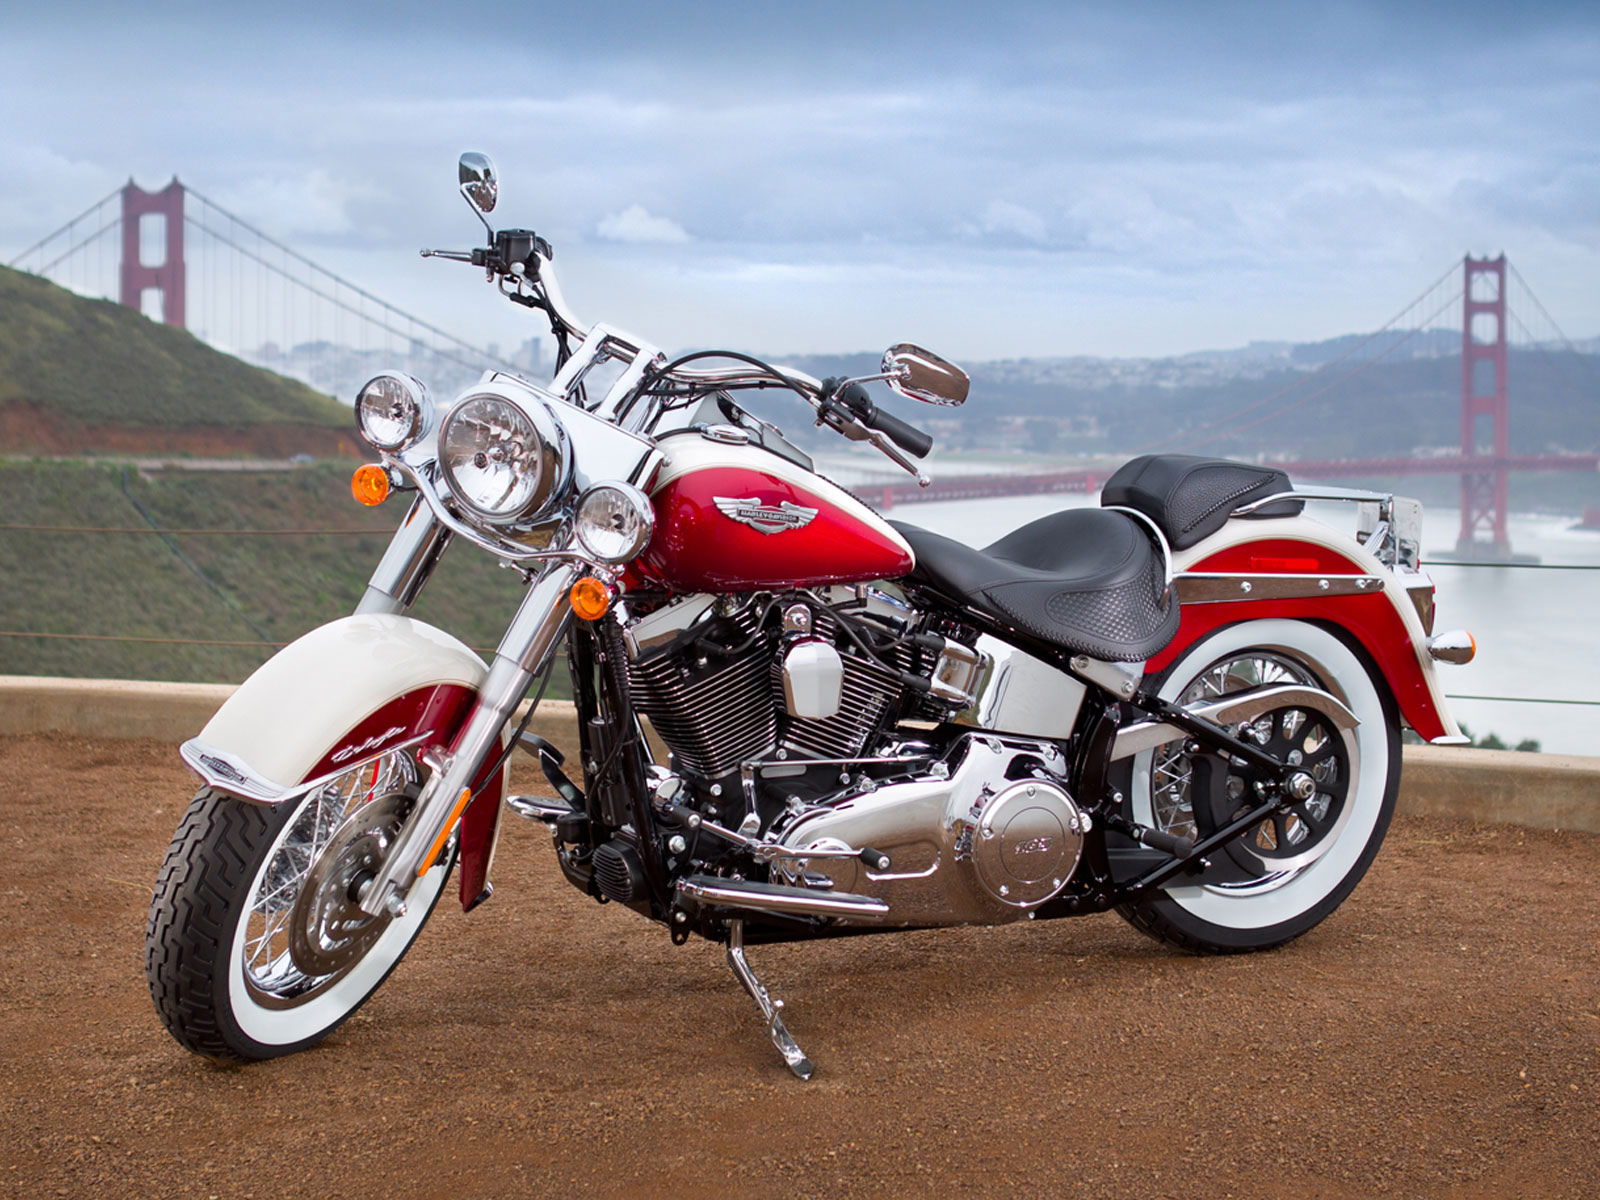 2013 FLSTN Softail Deluxe Harley-Davidson pictures and ...